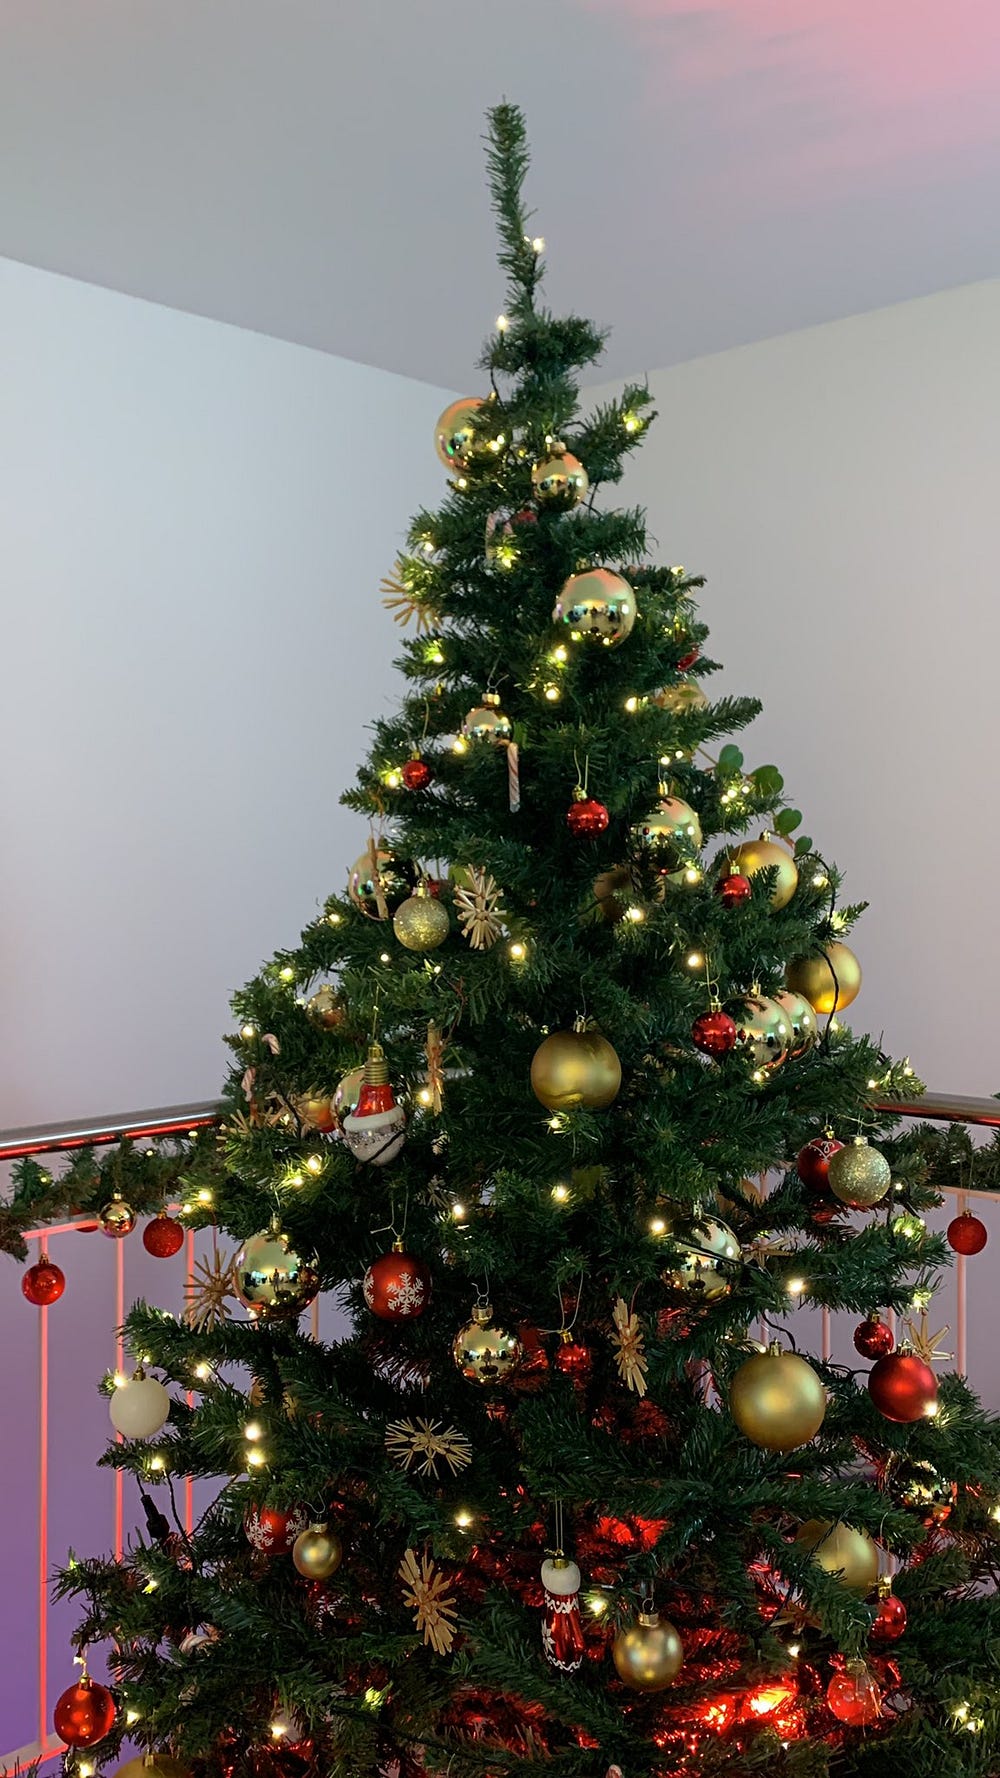 A photo of the decorated Christmas tree in the SQIN office.